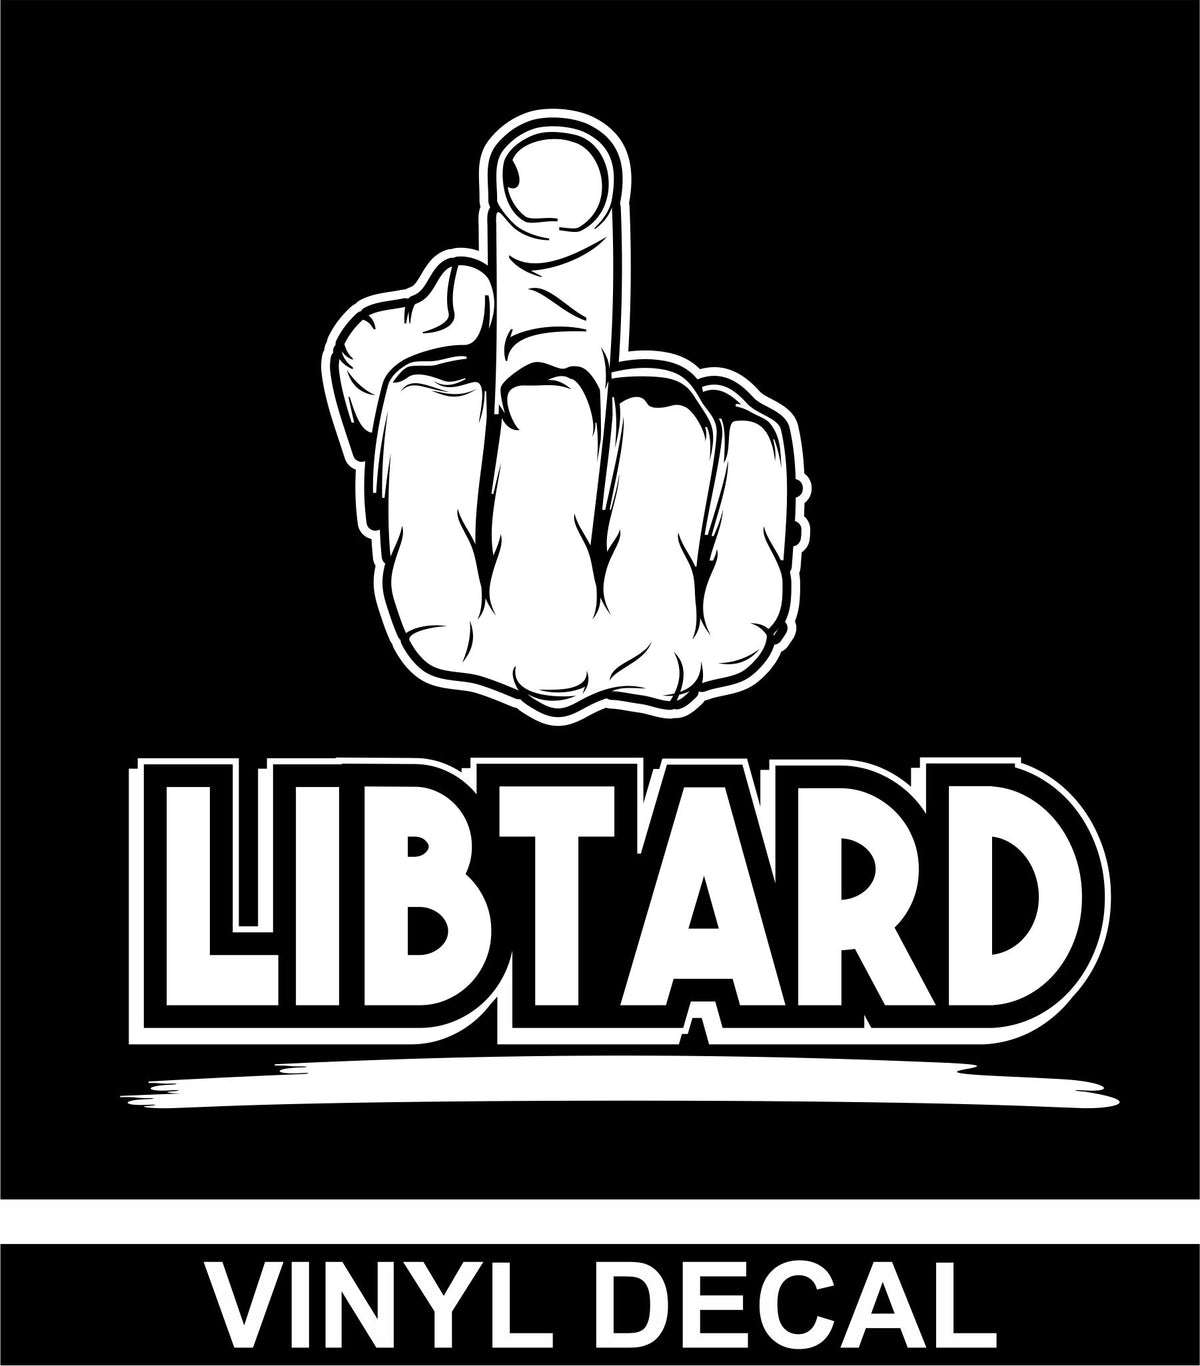 The Middle Finger - Libtard - Vinyl Decal - Free Shipping